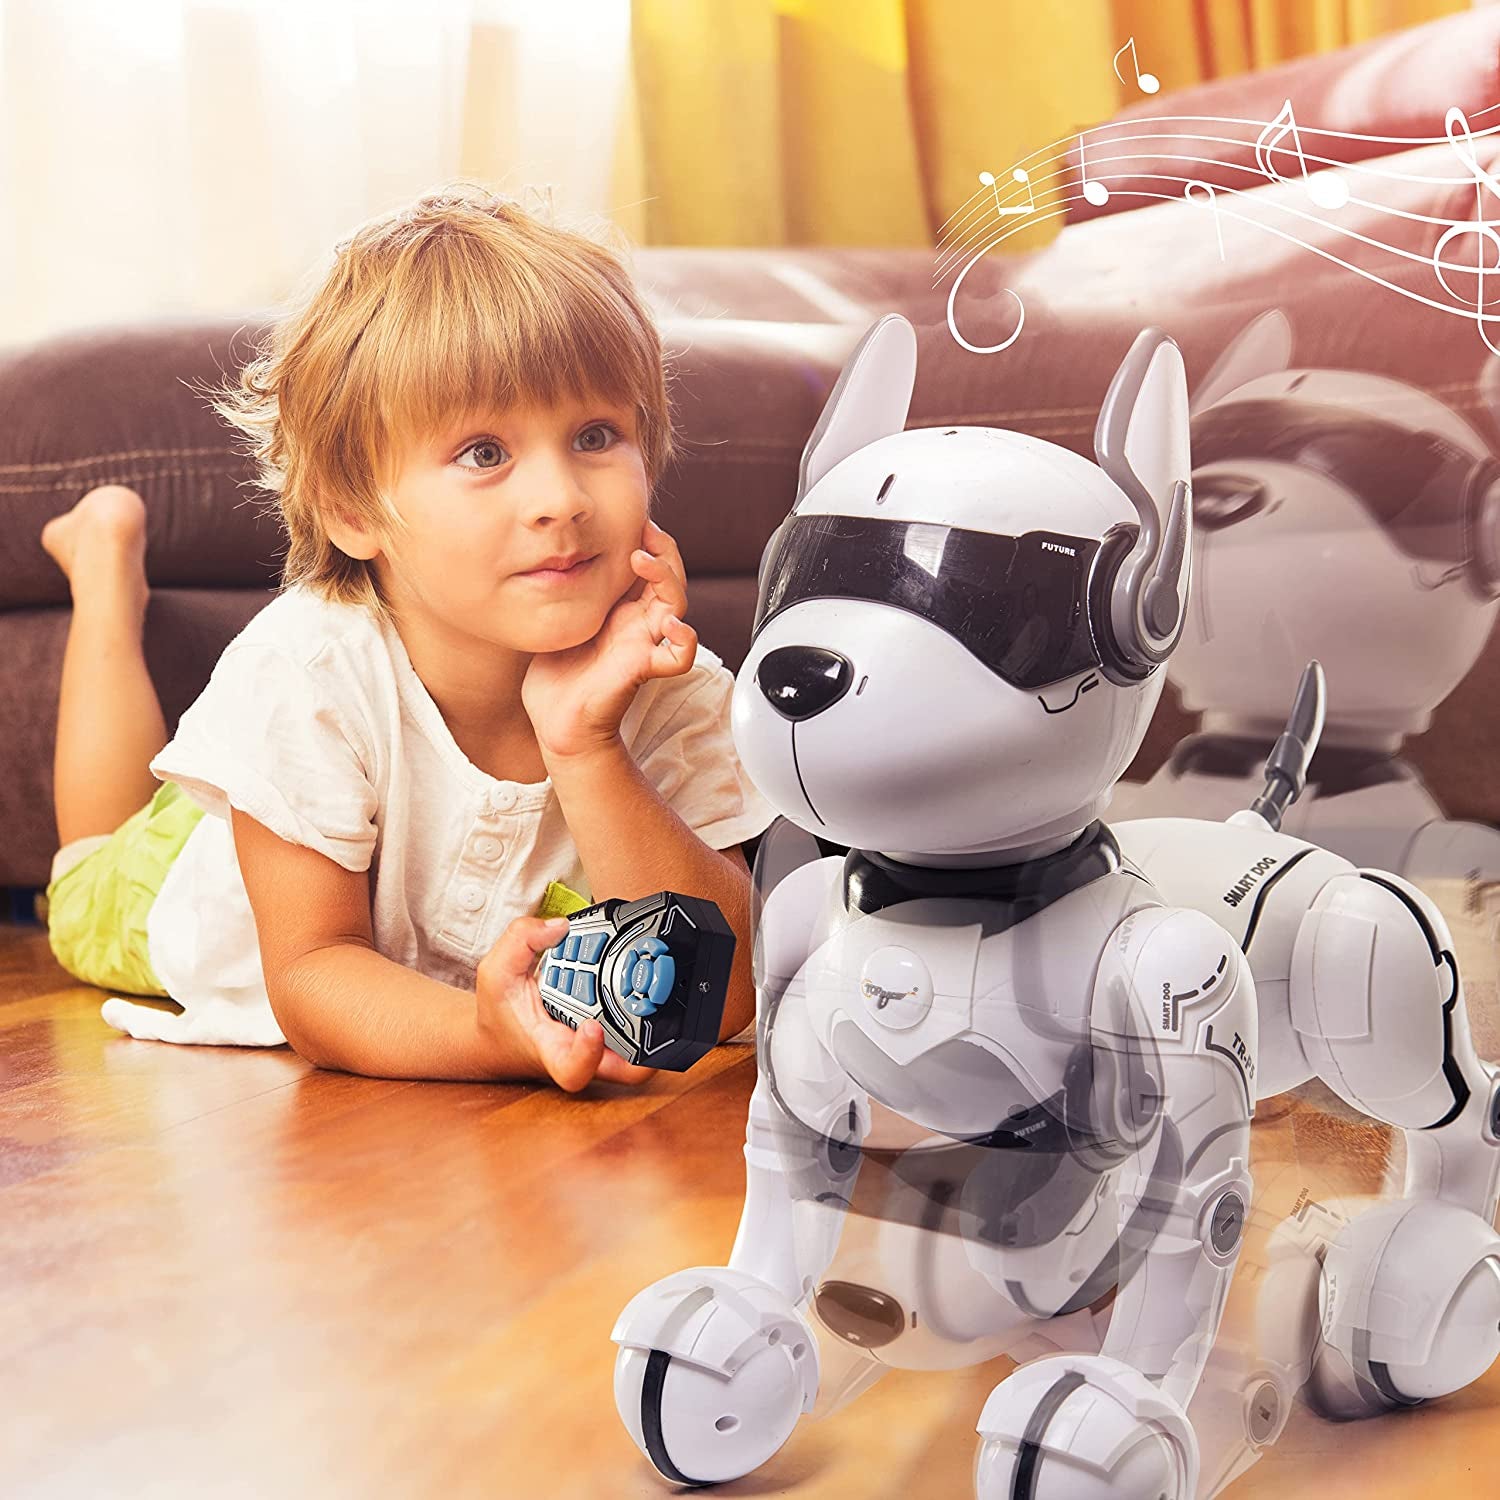 Child model holding black remote control for white, black, and gray robot dog with musical notes for emphasis